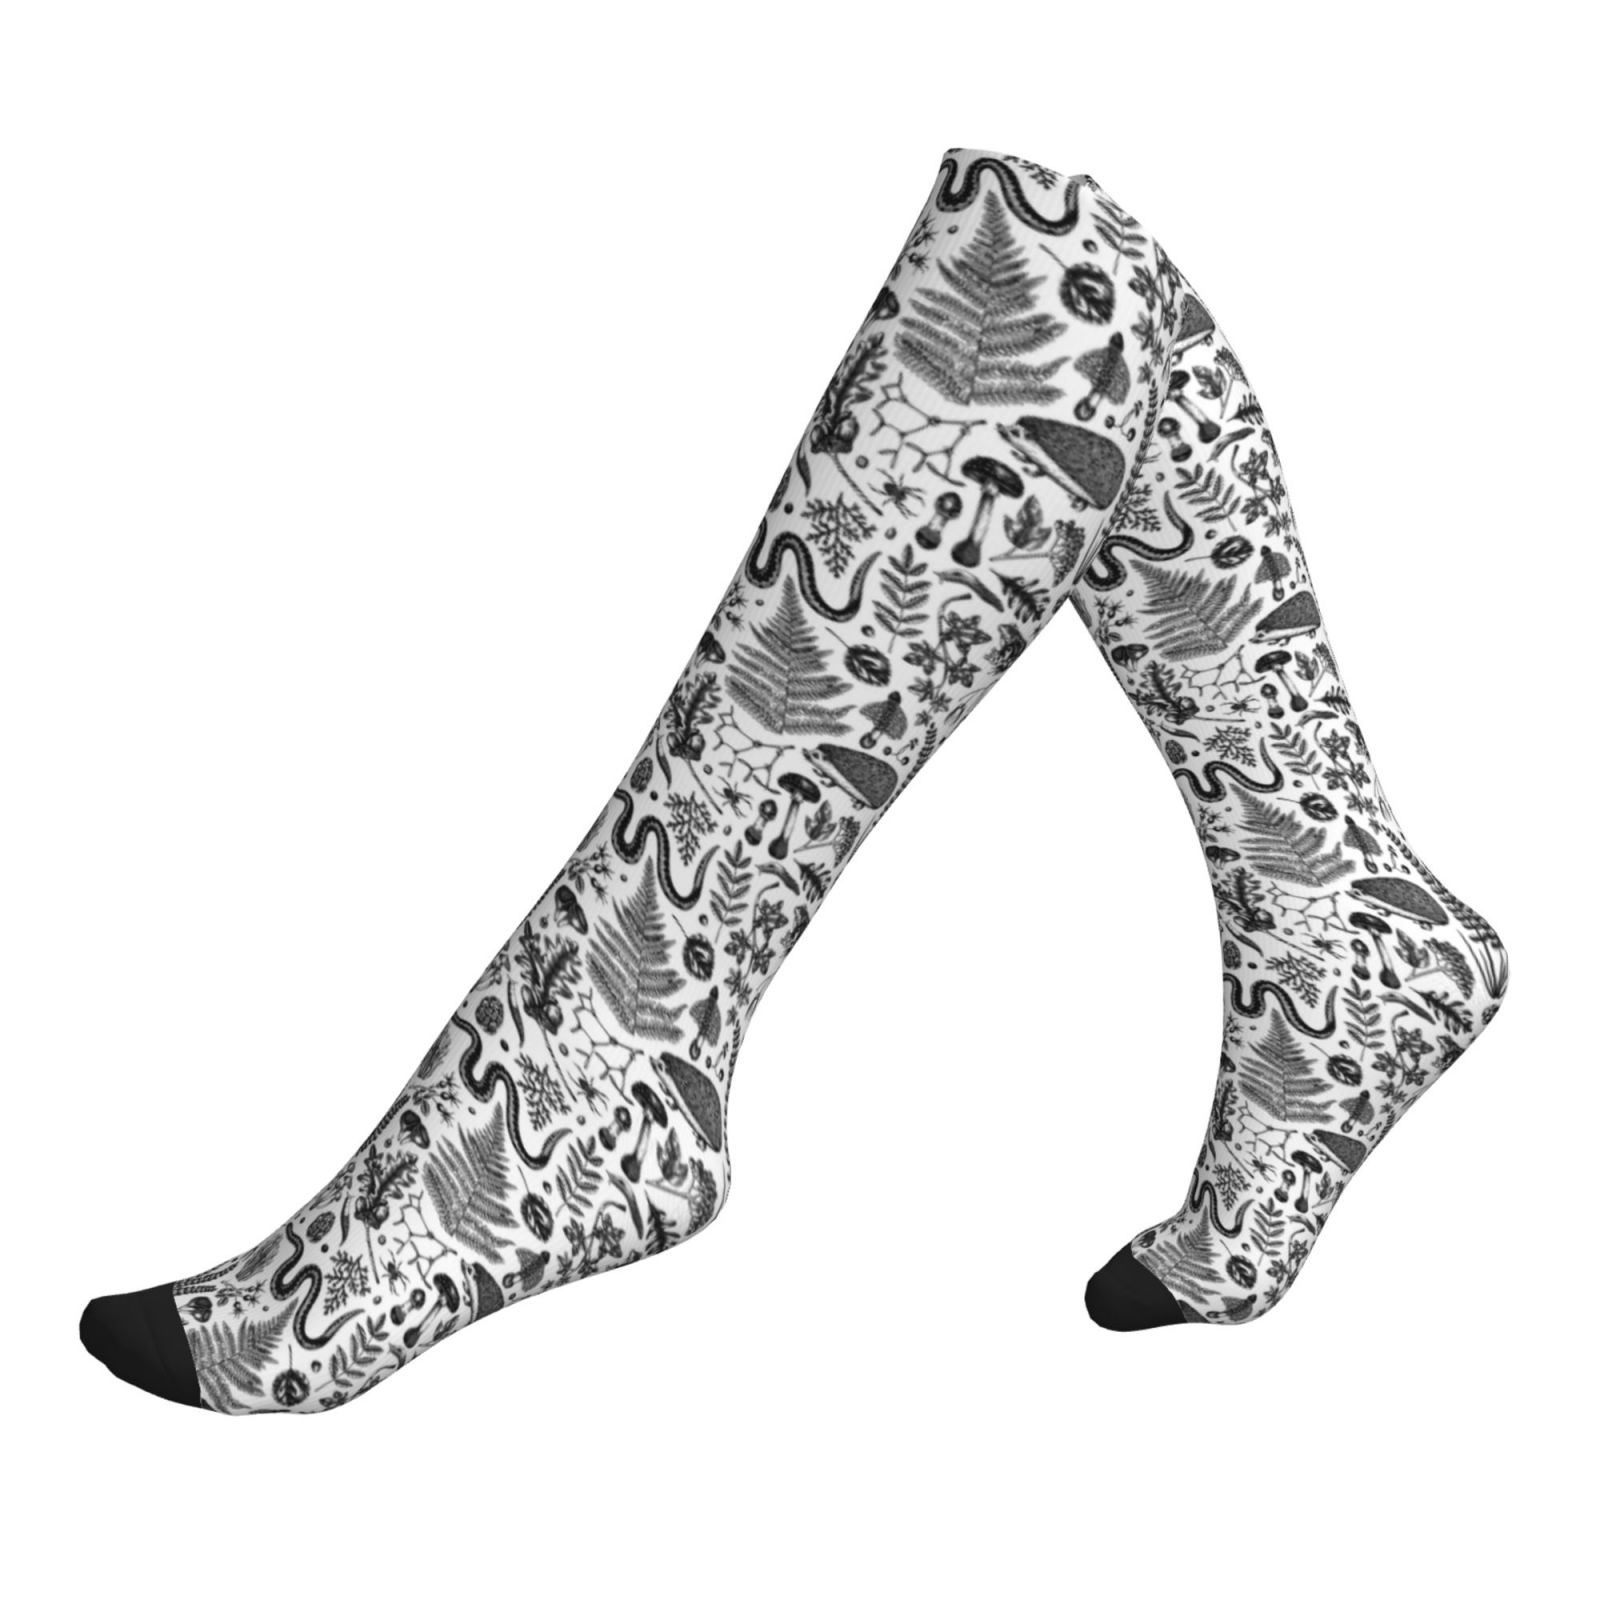 Matuu Fall Forest for Soft Athletic Compression Socks for men and women ...